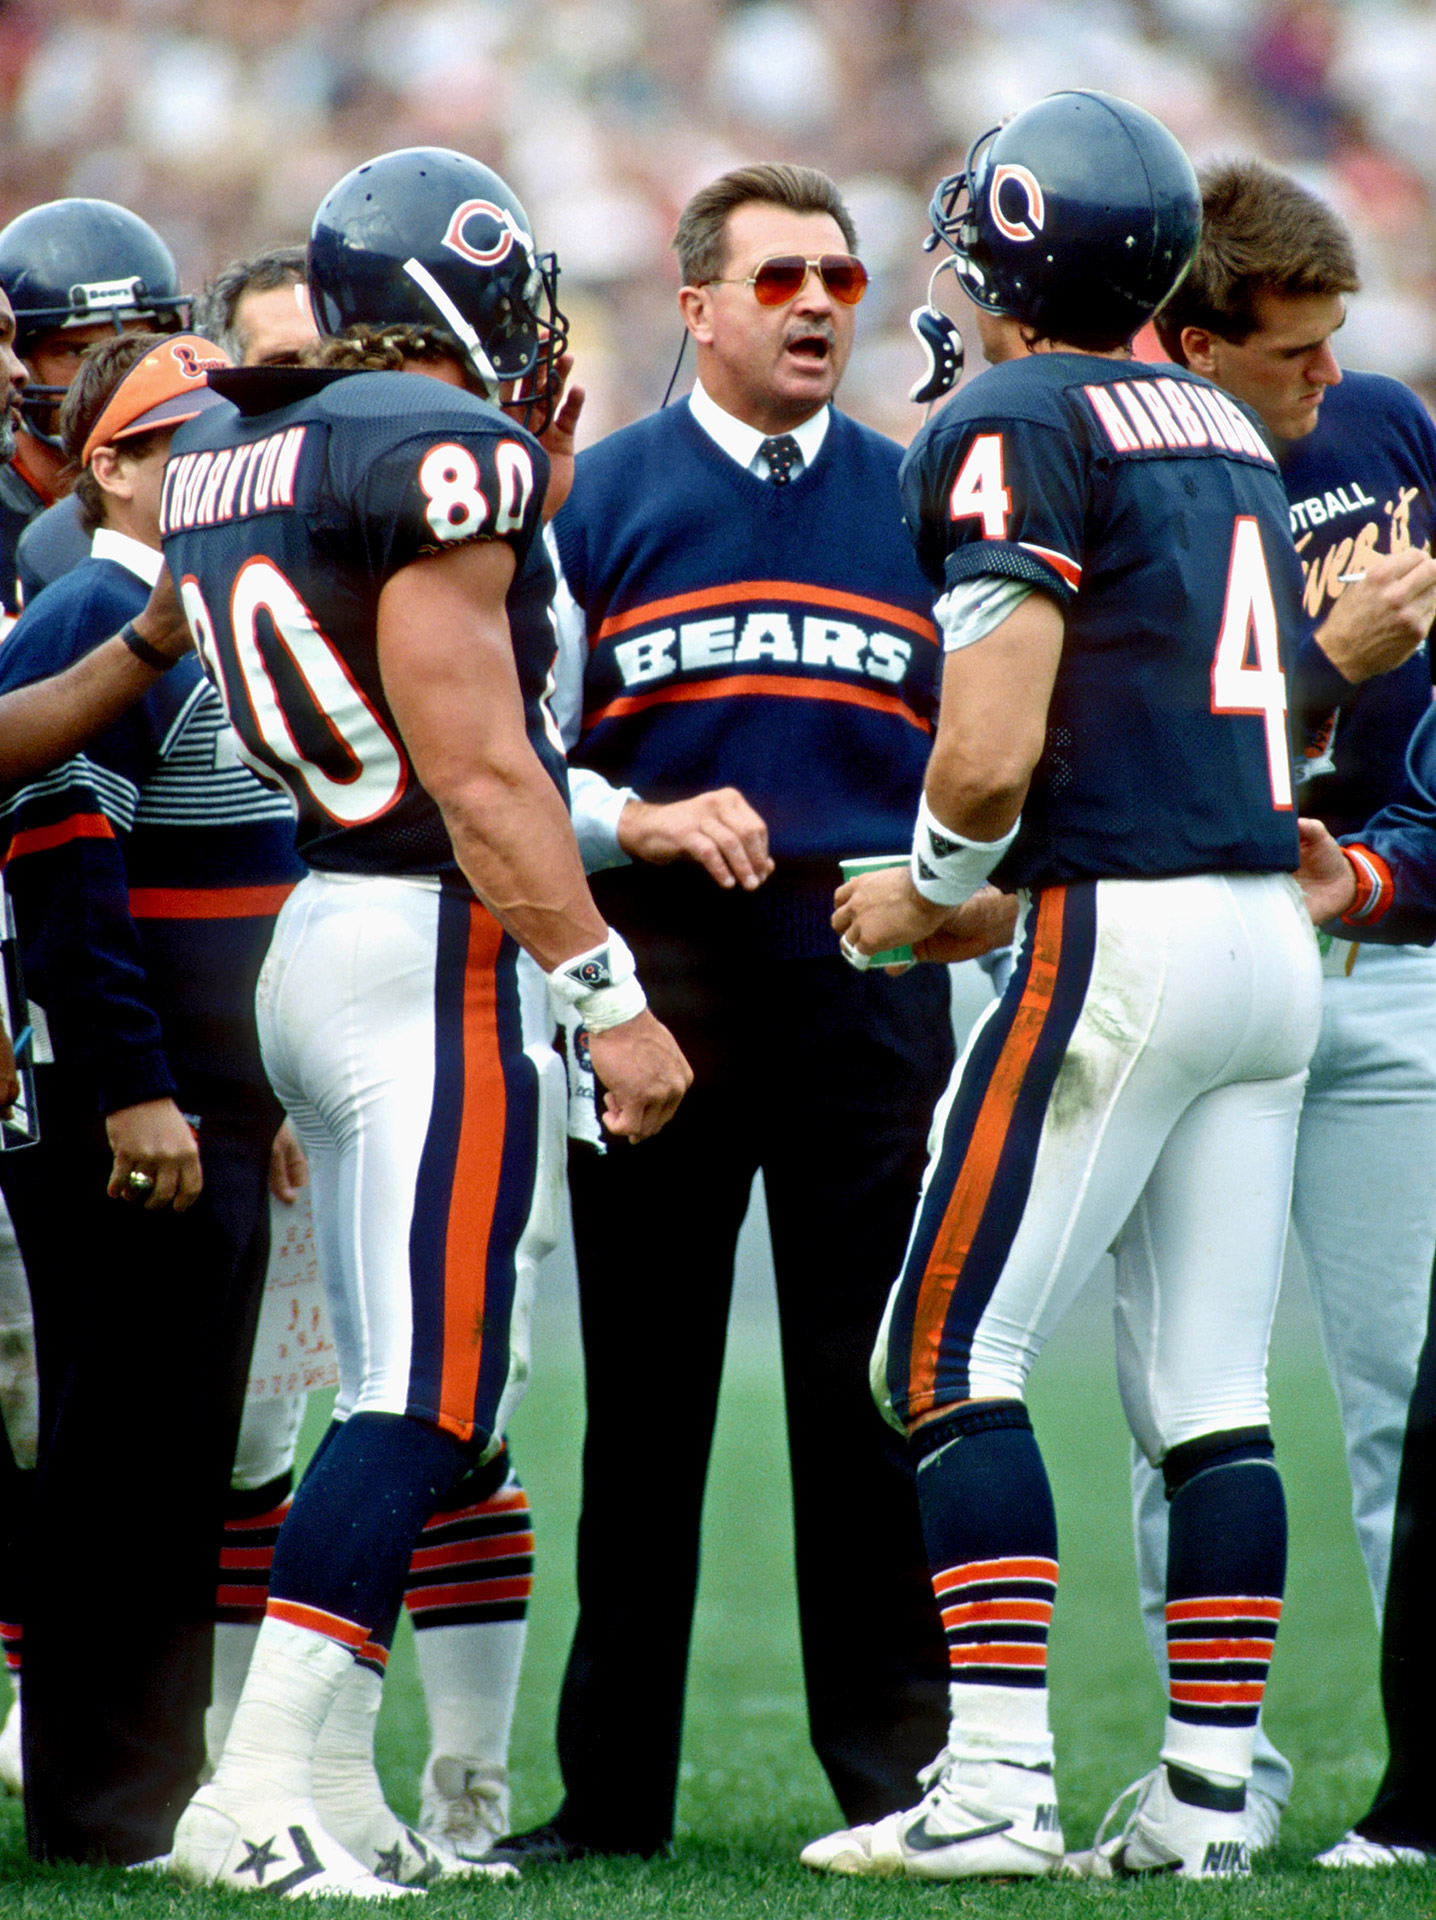 Mike Ditka's Haggadah Insight | Yaakov Wolff | The Blogs